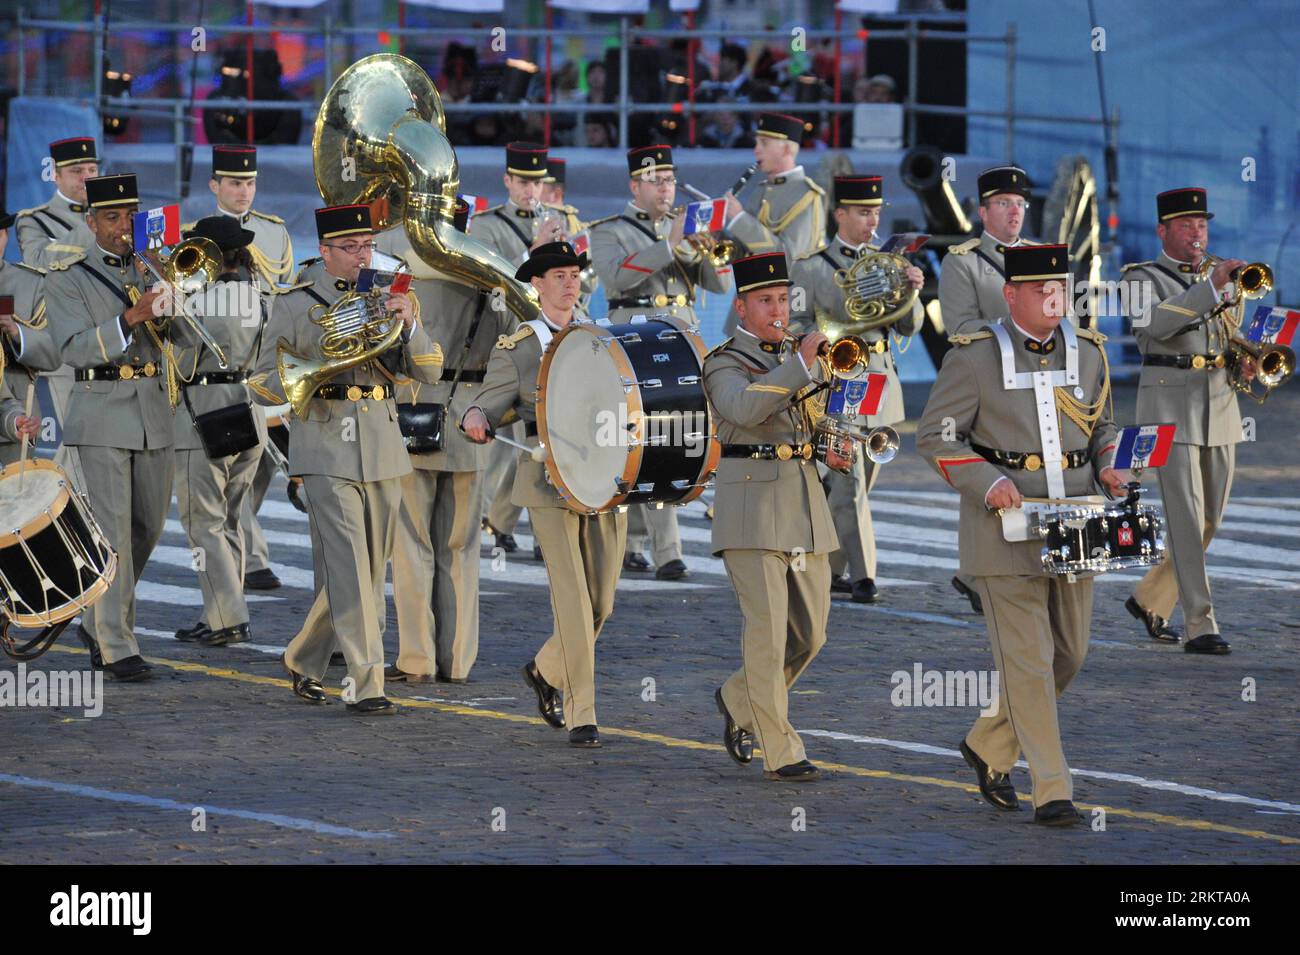 Bildnummer: 58416195  Datum: 01.09.2012  Copyright: imago/Xinhua  MOSCOW,  2012 (Xinhua) -- A team parades during the International Military Music Festival at Red Square in Moscow, on Sept. 1, 2012. Military bands from different countries participate in the annual tattoo. (Xinhua/Pavel) (lr) RUSSIA-MOSCOW-INTERNATIONAL MILITARY MUSIC FESTIVAL PUBLICATIONxNOTxINxCHN Gesellschaft Militär Musik Militärmusik Musikfestival Militärmusikfestival xas x0x premiumd 2012 quer     58416195 Date 01 09 2012 Copyright Imago XINHUA Moscow 2012 XINHUA a Team Parades during The International Military Music Fest Stock Photo